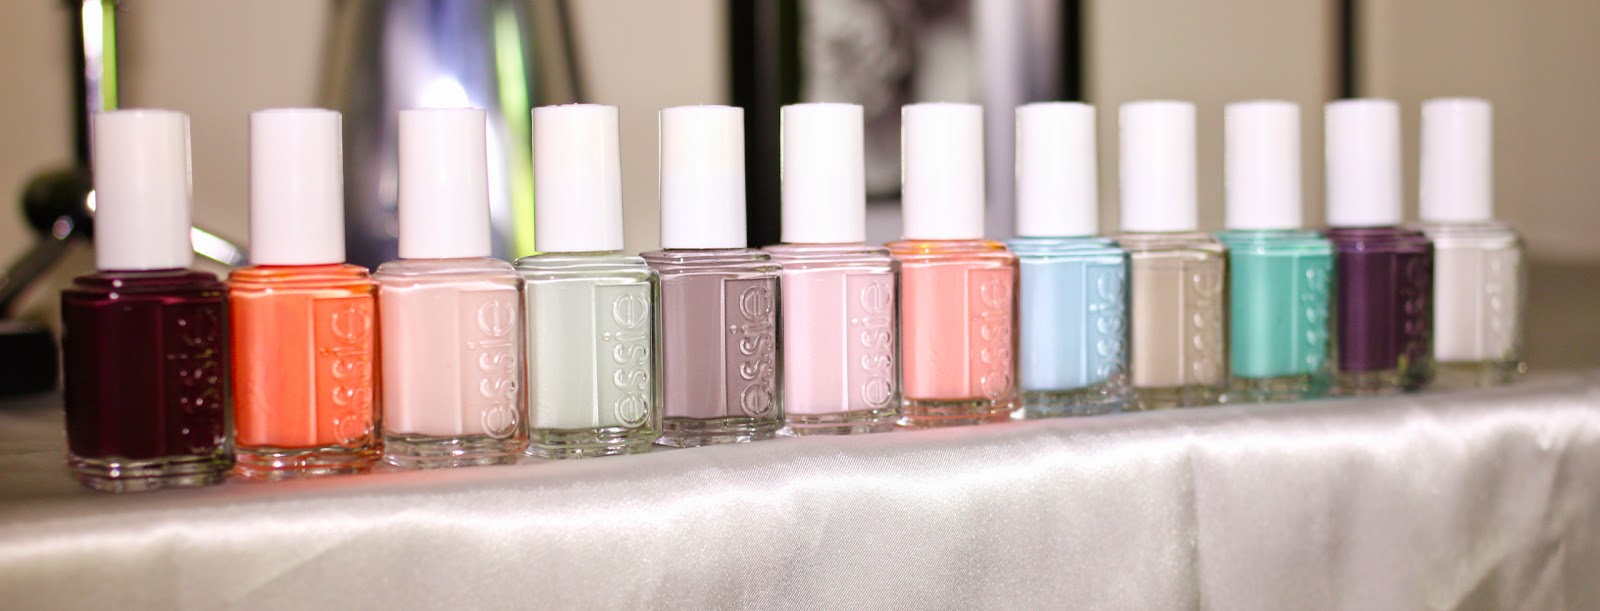 The best 21 nail polish brands worldwide...and the worst too!